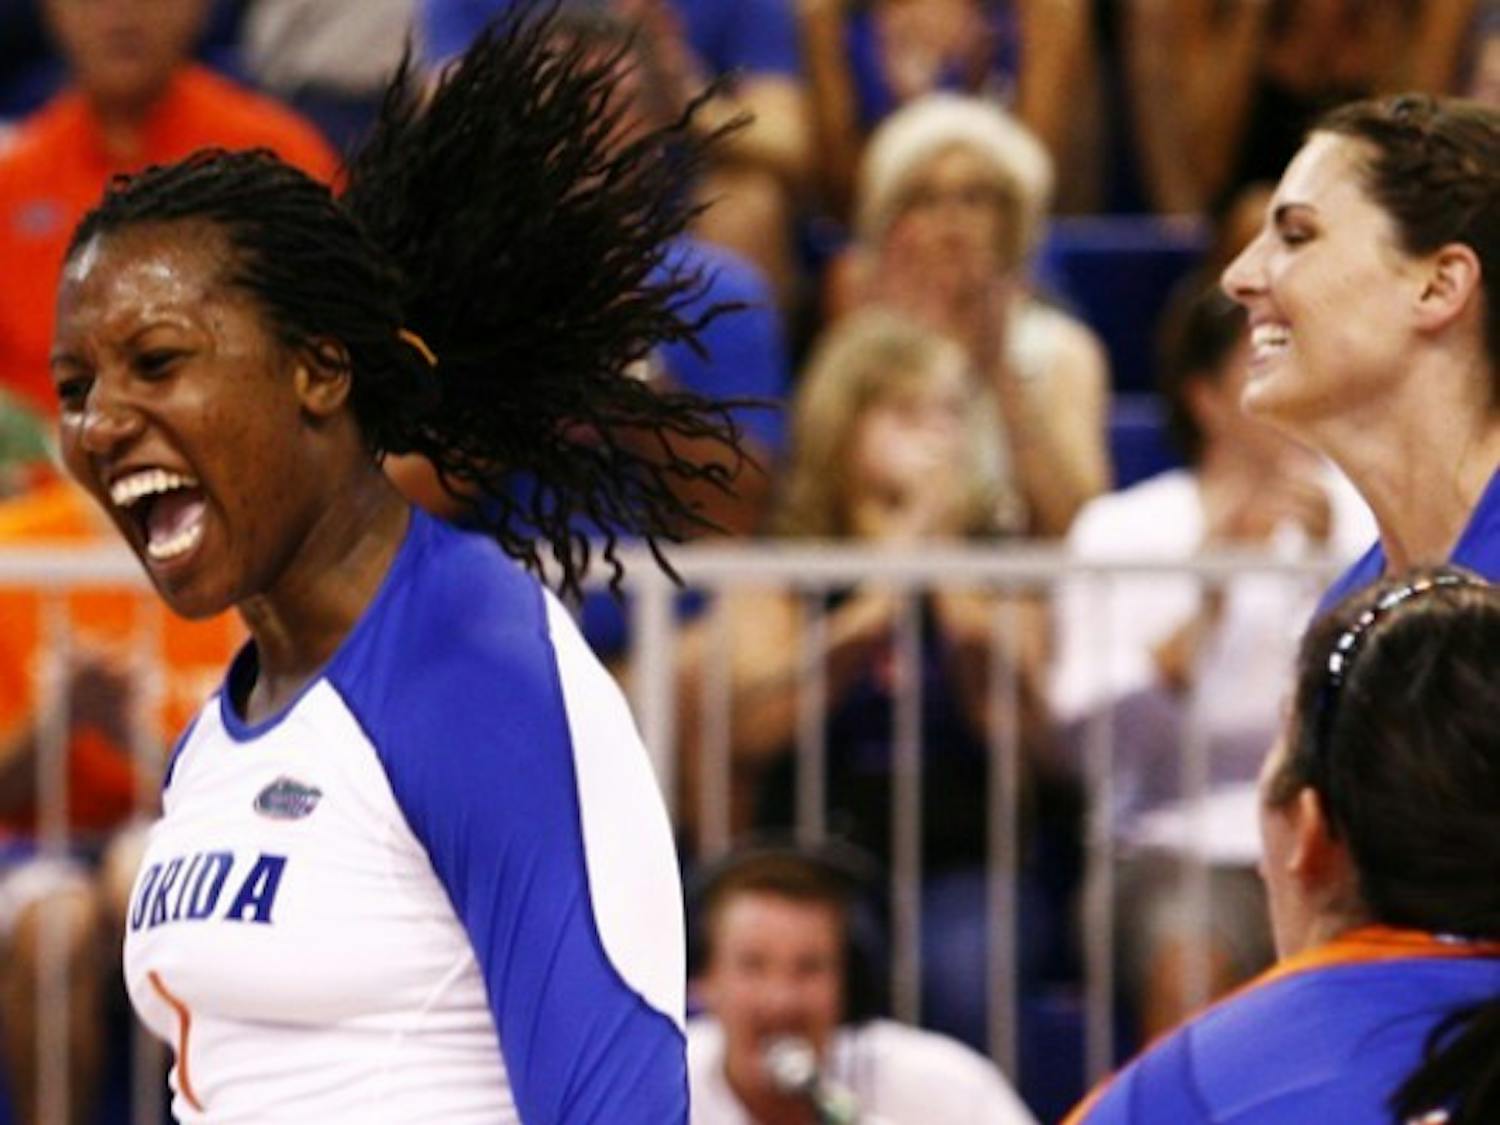 Florida outside hitter Stephanie Ferrell was named the Active Ankle SEC/ACC Challenge’s Most Valuable Player after recording 20 kills and hitting .382 in two games during the weekend.&nbsp;